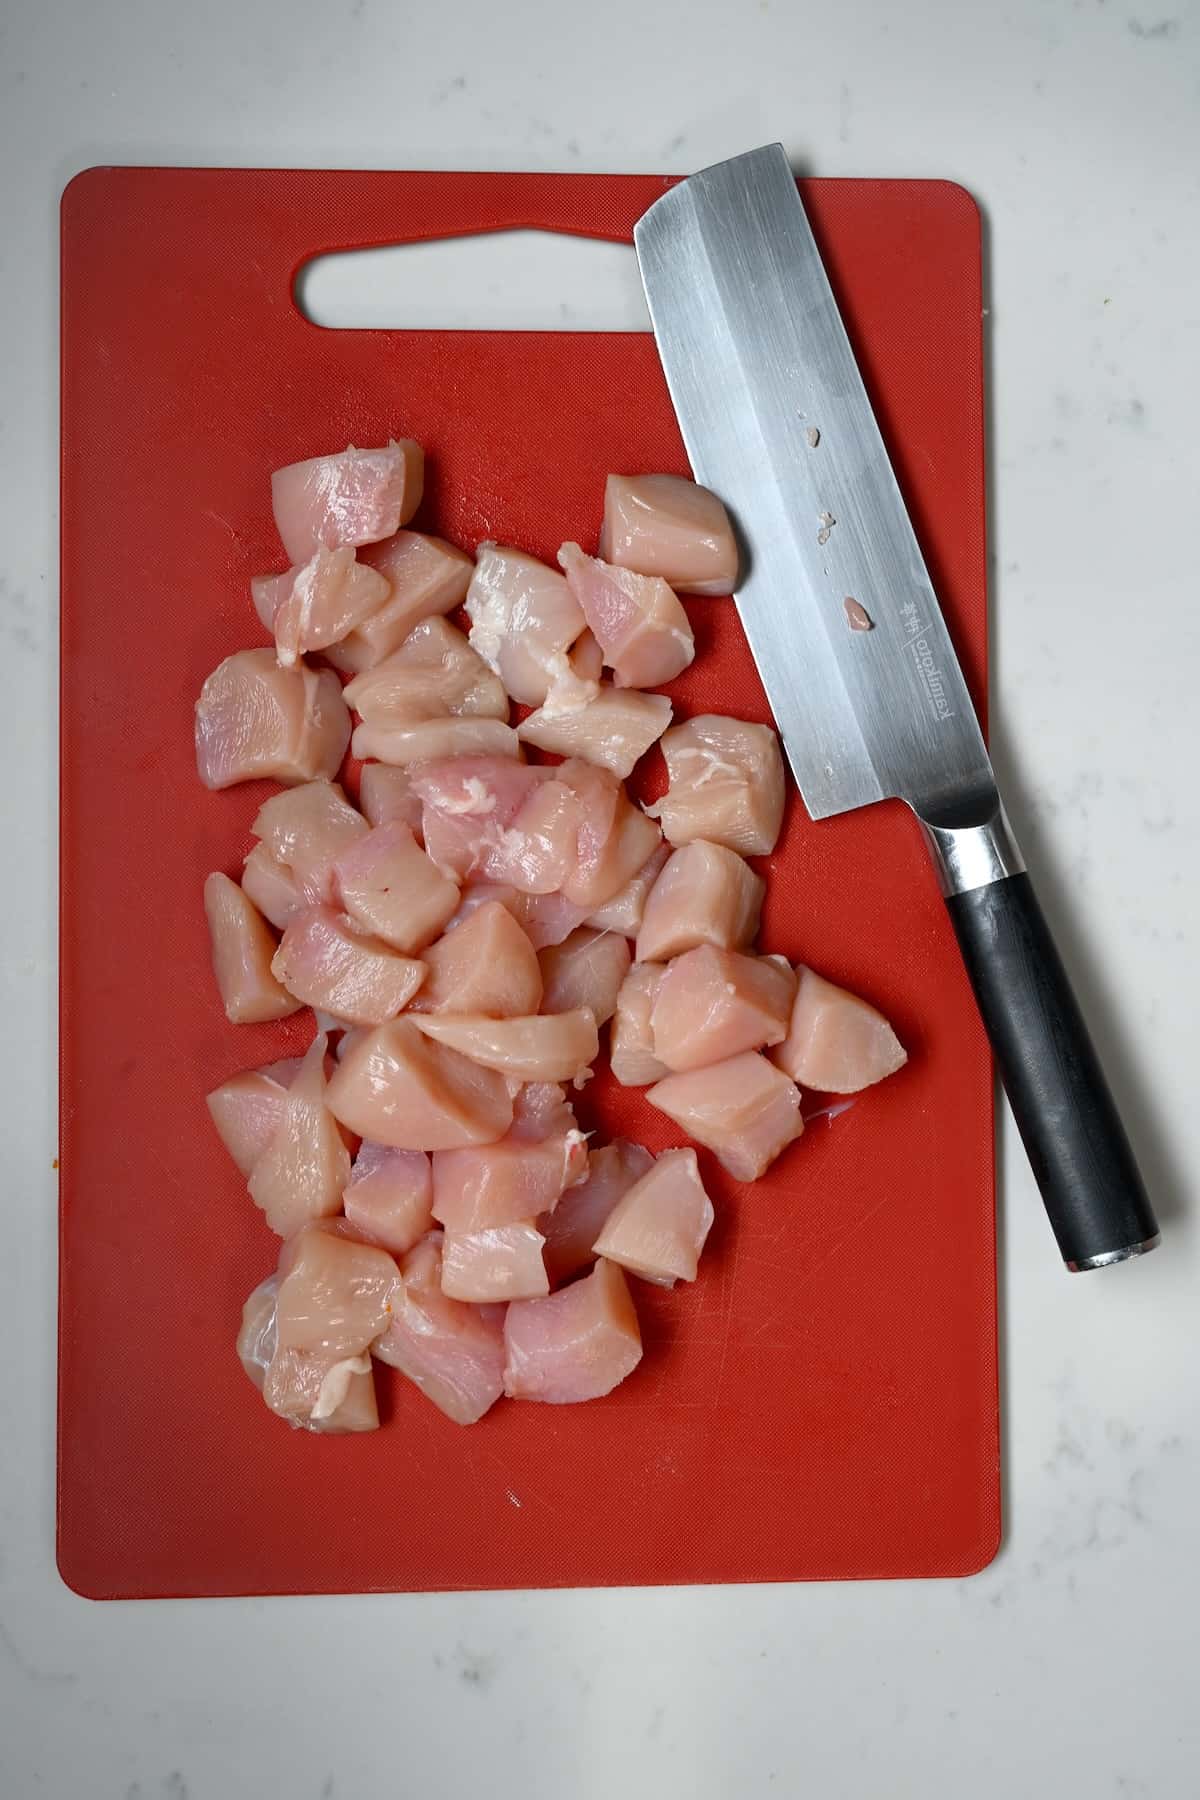 Chopped chicken breasts on a cutting board